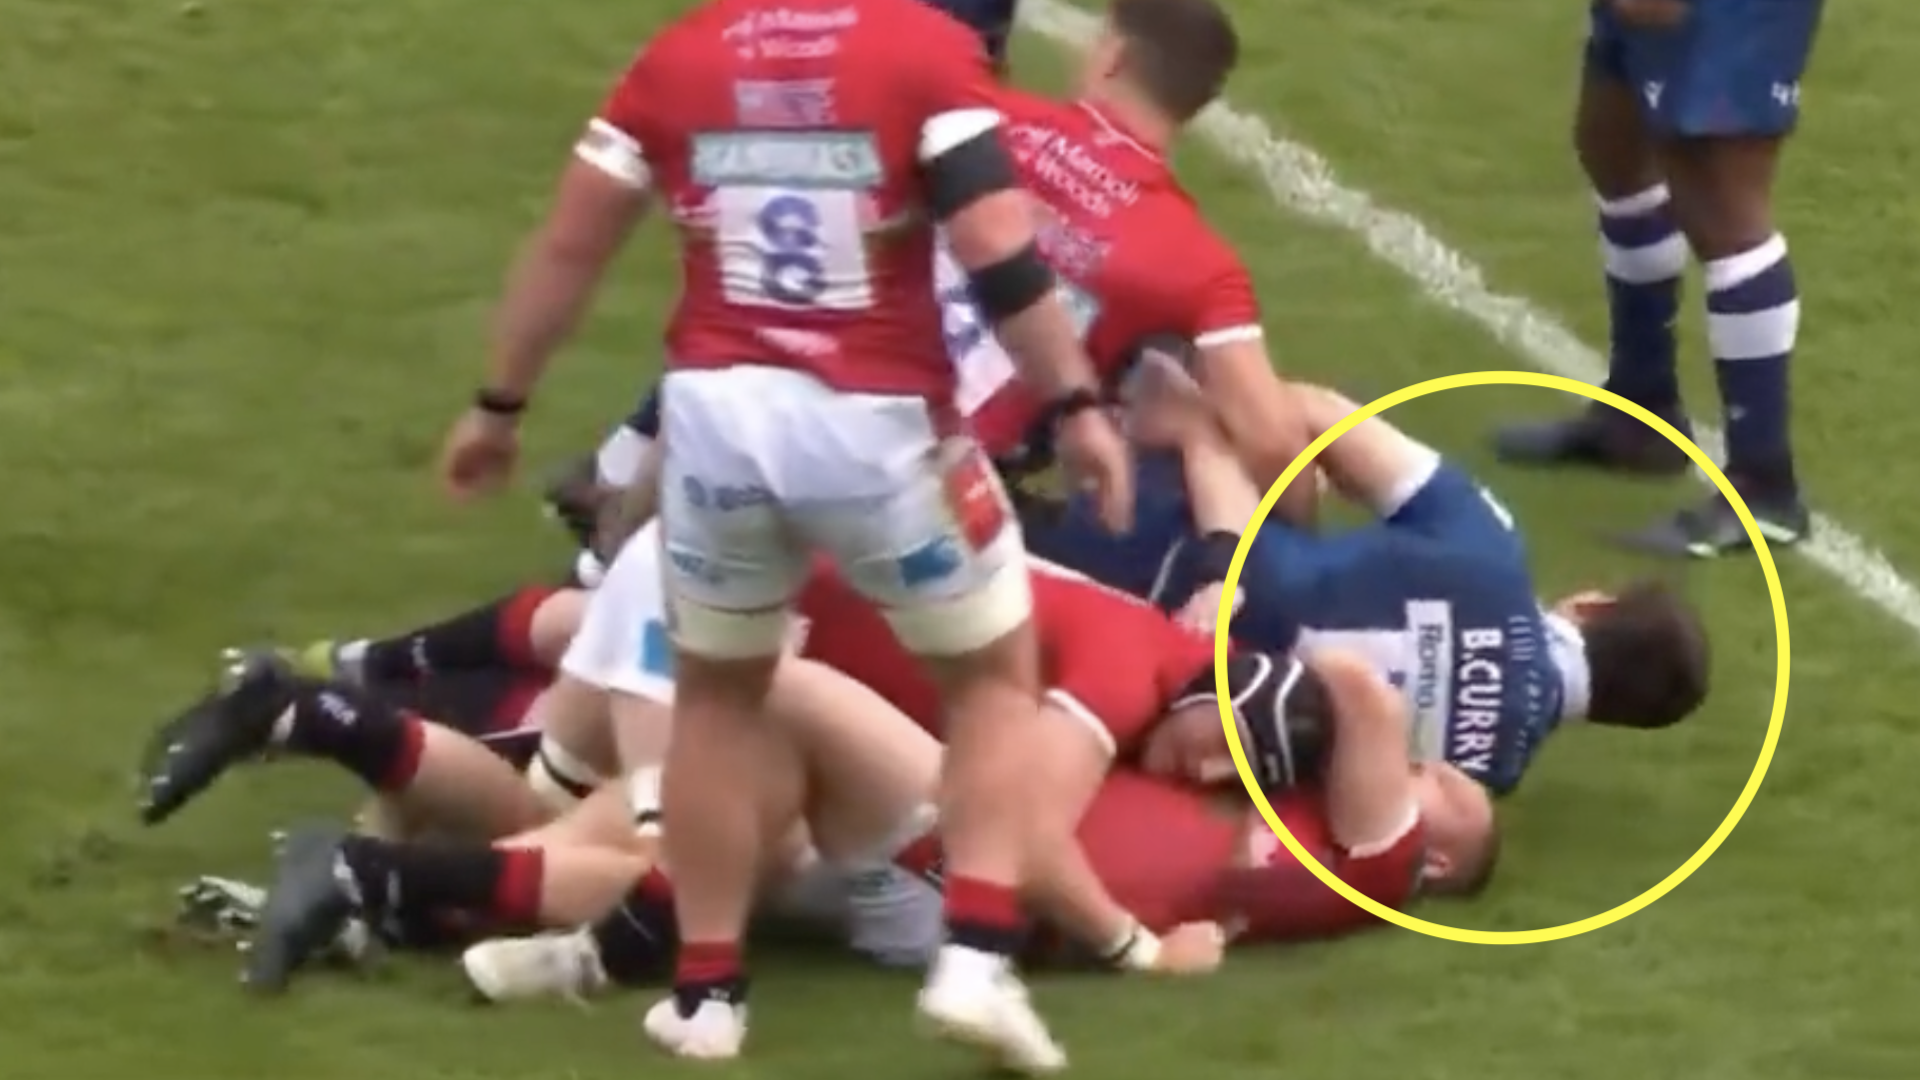 The gruesome injury that has put England flanker's World Cup in jeopardy